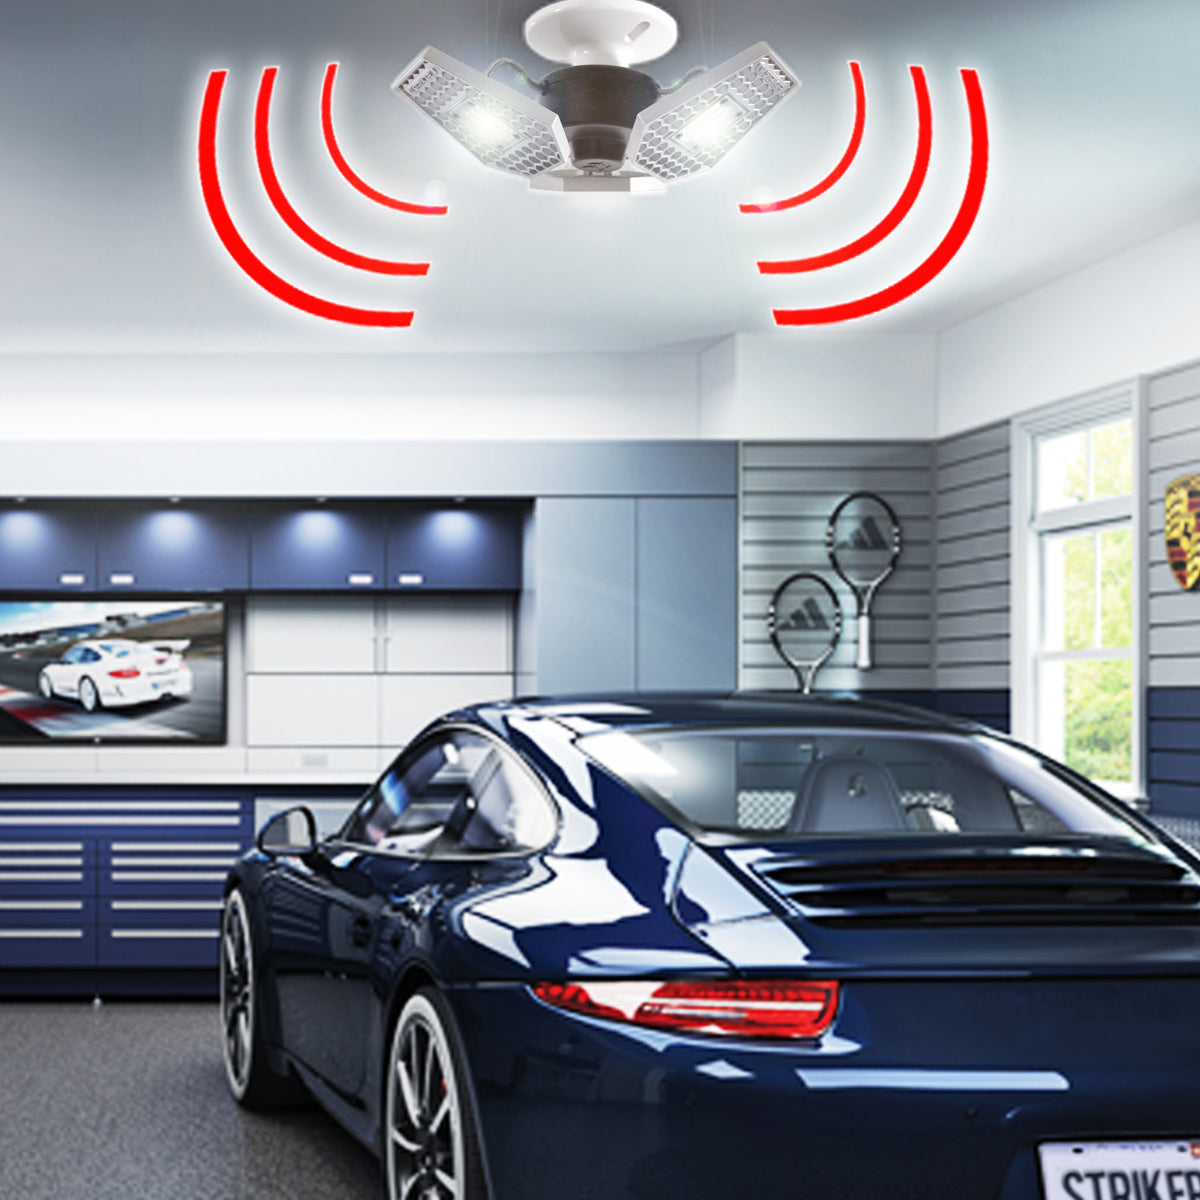 TRiLIGHT motion sensing poster featuring the product in a clean garage with a sports car parked in it.